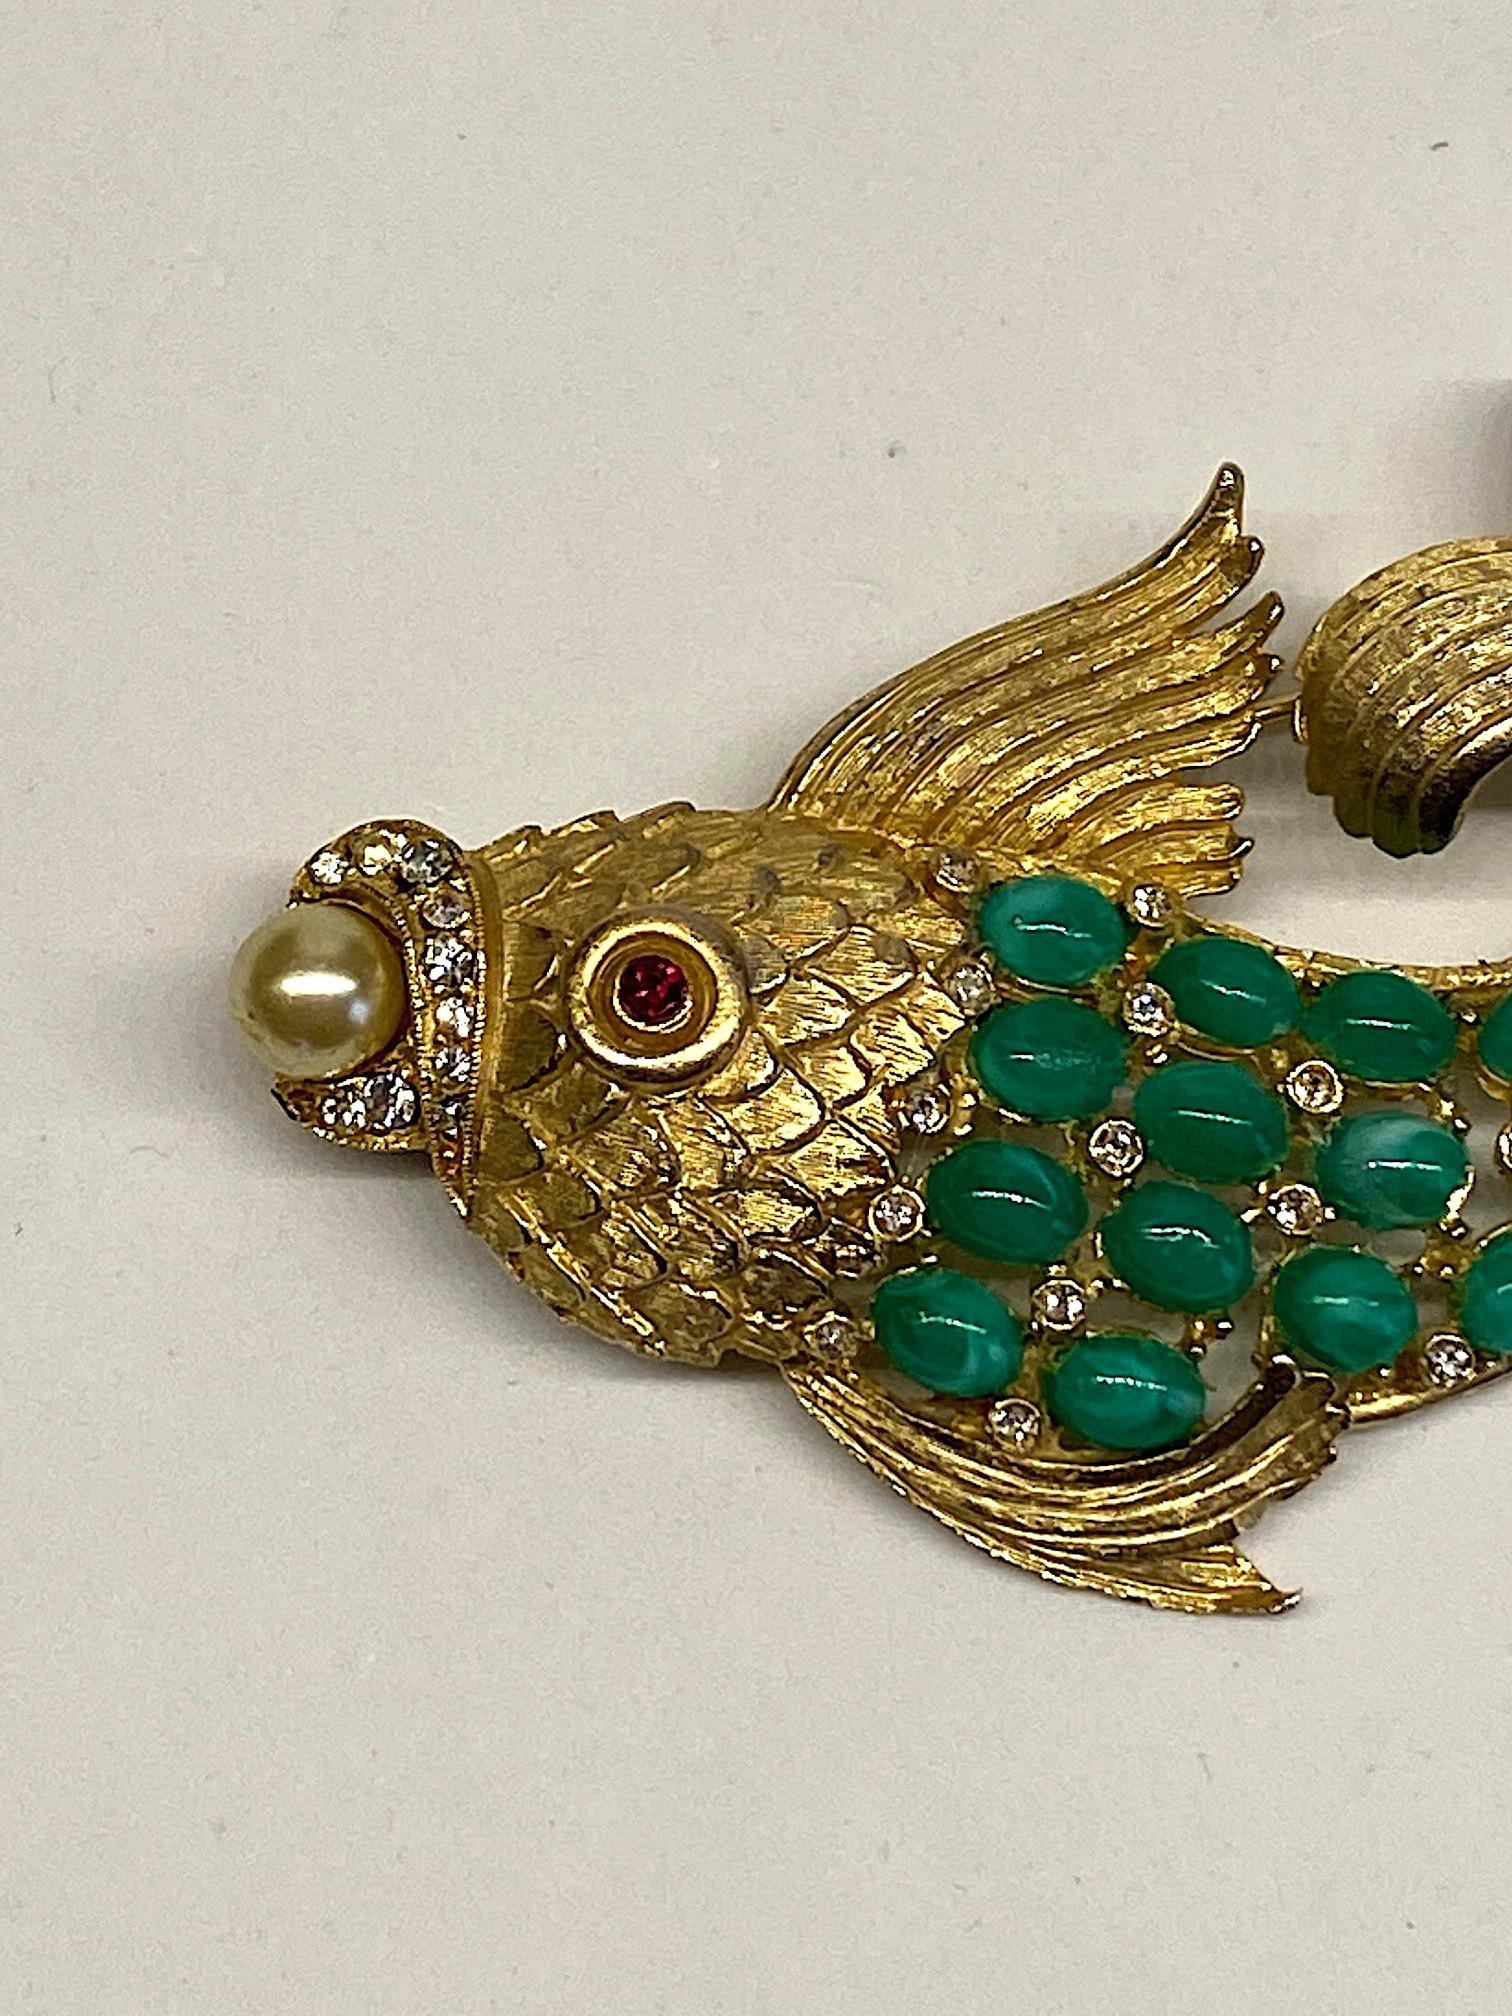 1950s Satin Gold Figural Brooch of Fish with Green Cabochon 4